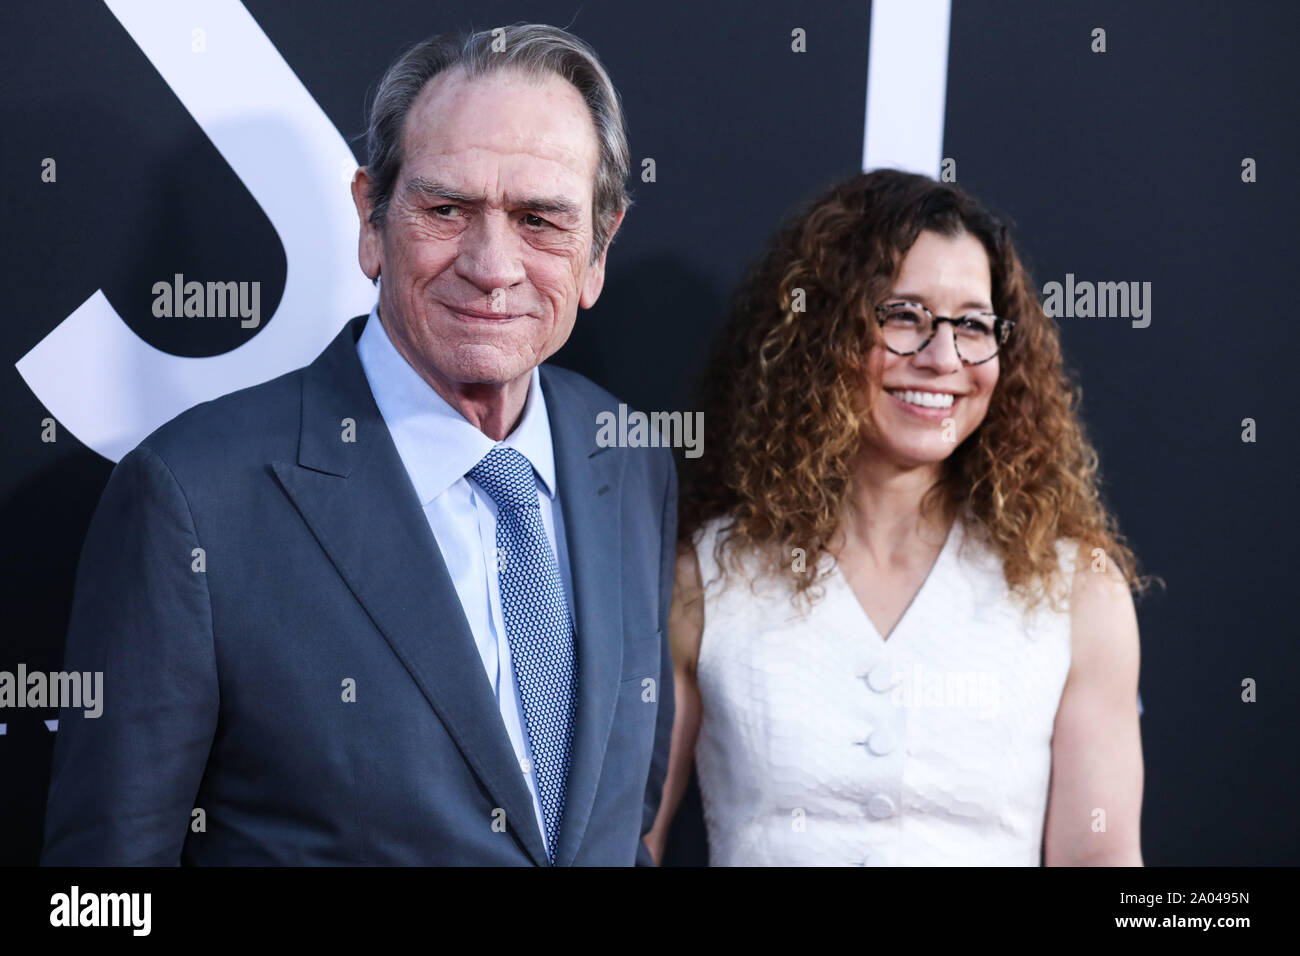 HOLLYWOOD, LOS ANGELES, CALIFORNIA, USA - SEPTEMBER 18: Actor Tommy Lee Jones and wife Dawn Laurel-Jones arrive at the Los Angeles Premiere Of 20th Century Fox's 'Ad Astra' held at ArcLight Cinemas Hollywood Cinerama Dome on August 18, 2019 in Hollywood, Los Angeles, California, United States. (Photo by Xavier Collin/Image Press Agency) Stock Photo